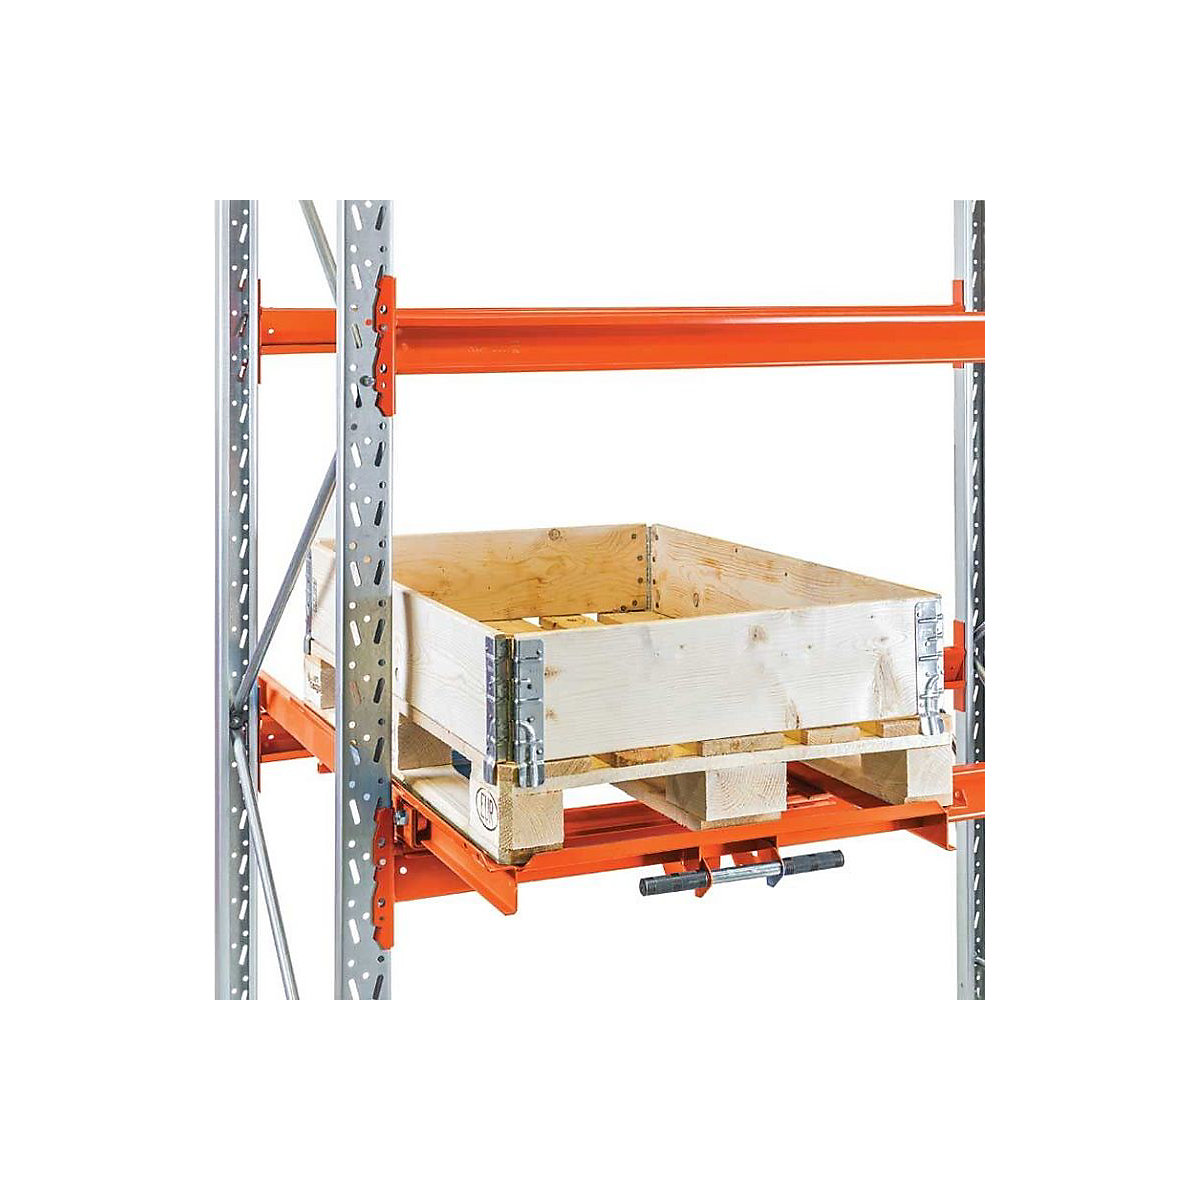 Assembly kit for Space pallet racking